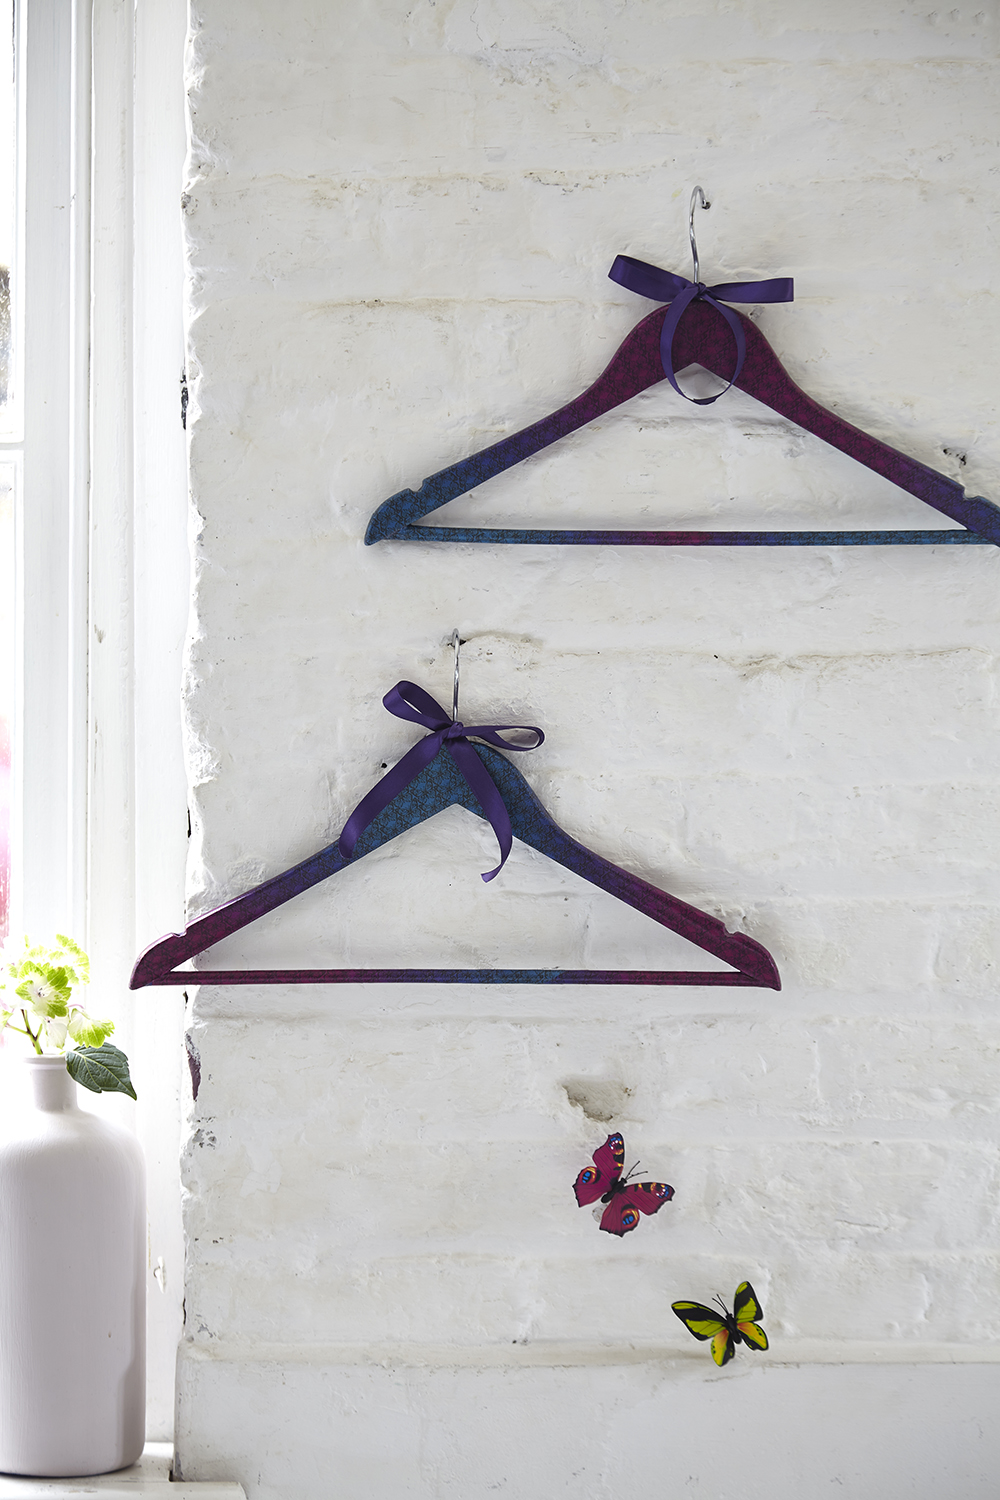 patterned-hand-made-coat-hangers-purple-turquoise-for-gifts-or-bedroom-or-hallway-designed-by-lauraloves-design.jpg